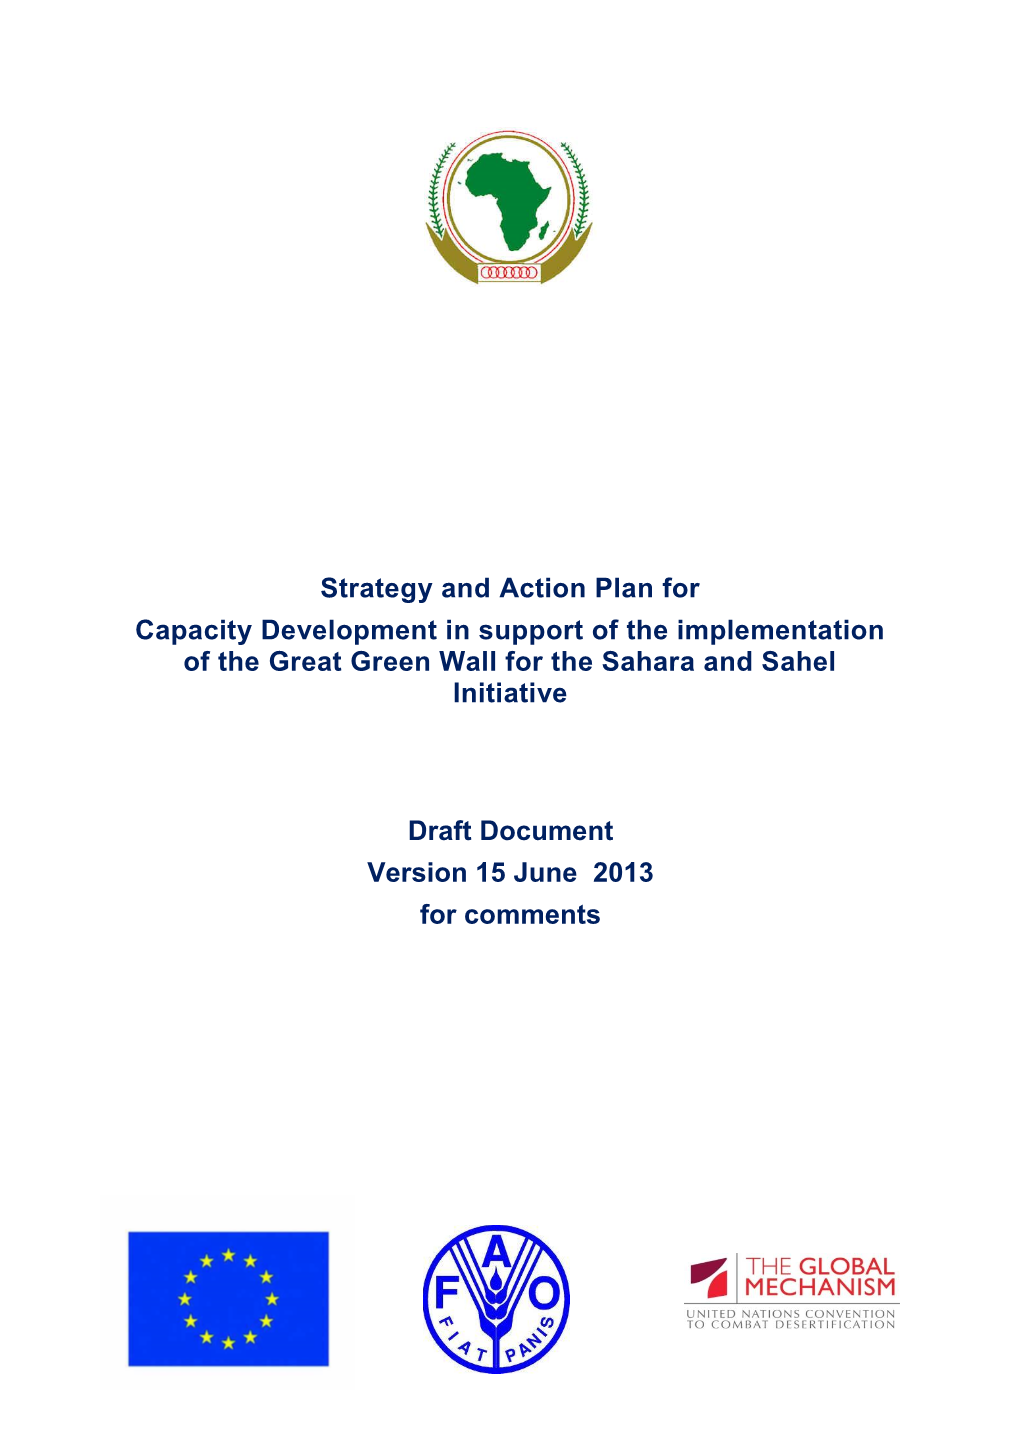 Strategy and Action Plan for Capacity Development in Support of the Implementation of the Great Green Wall for the Sahara and Sahel Initiative